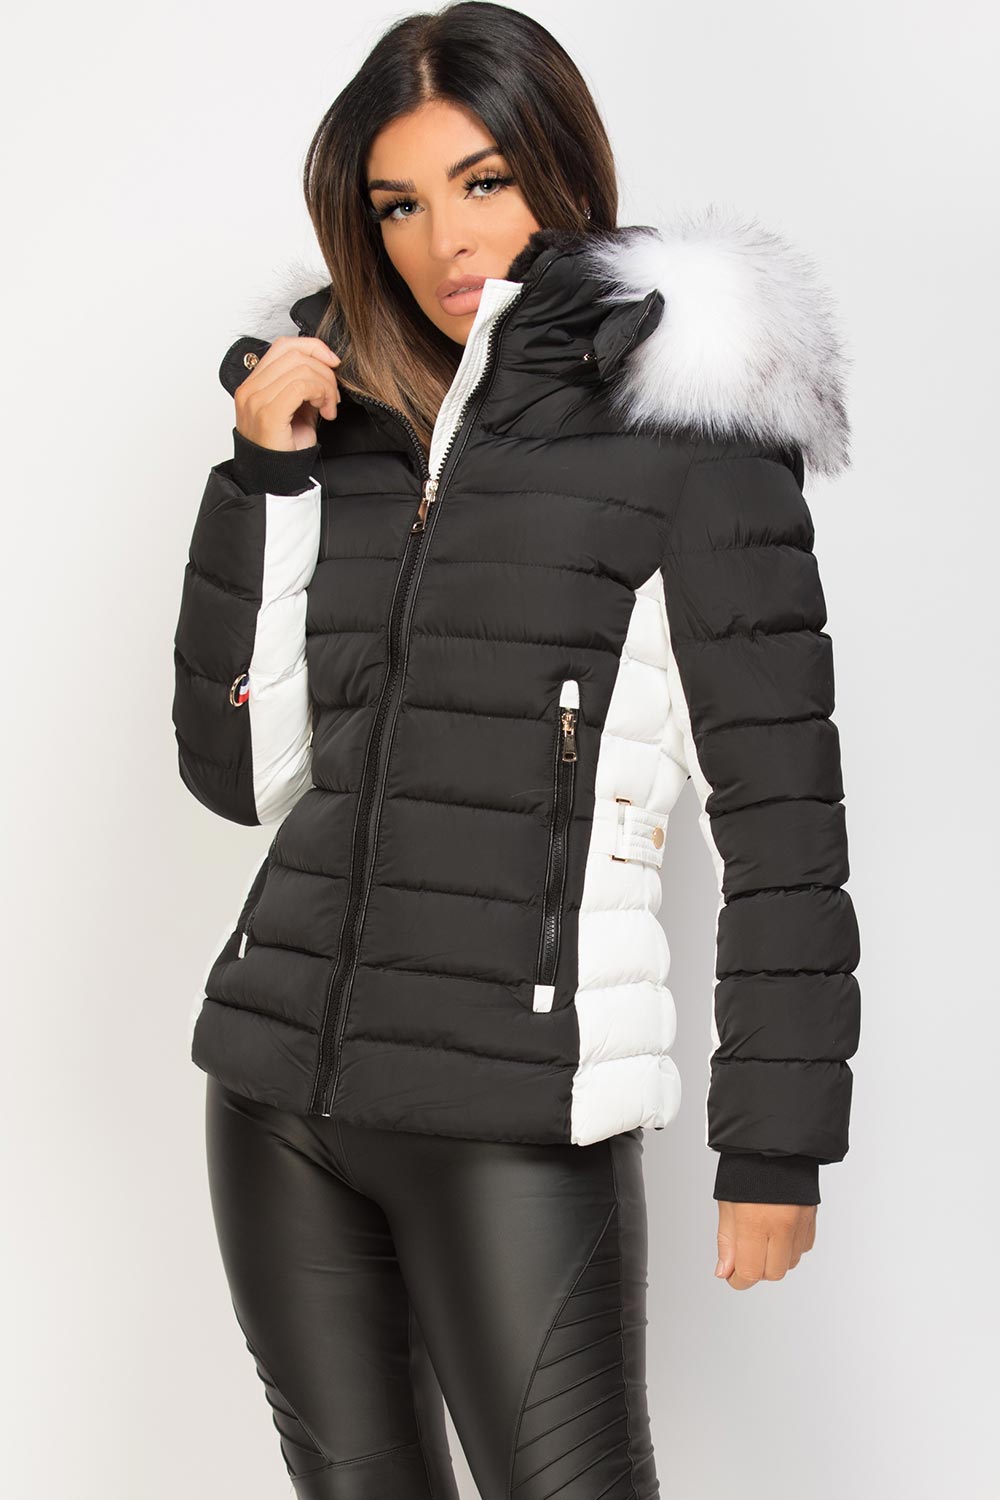 puffer jacket black and white 